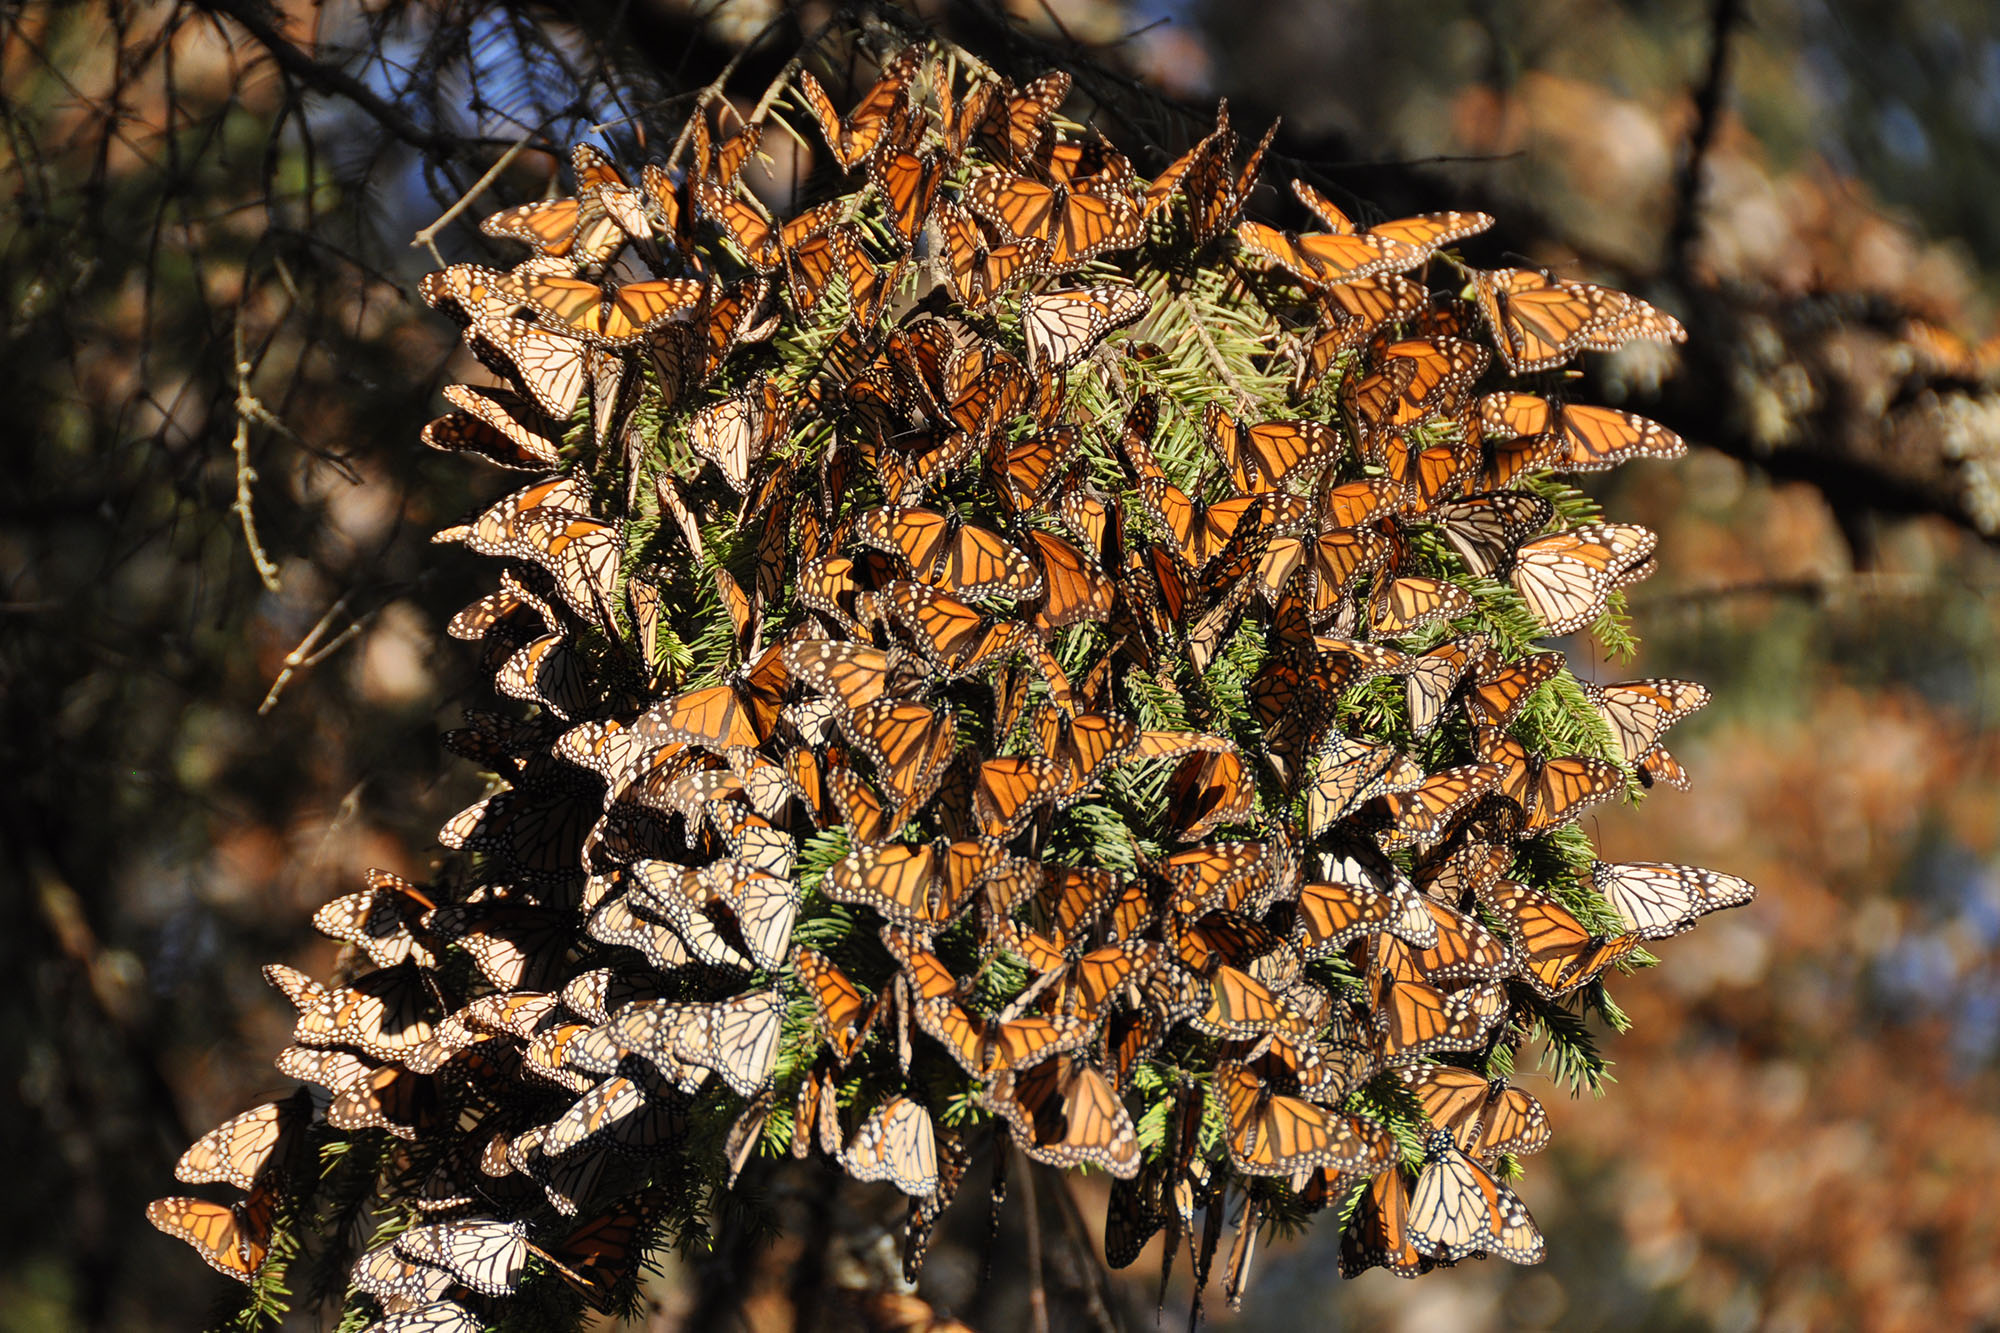 a cluster of monarch butterflies gather on a tree branch in the sun.